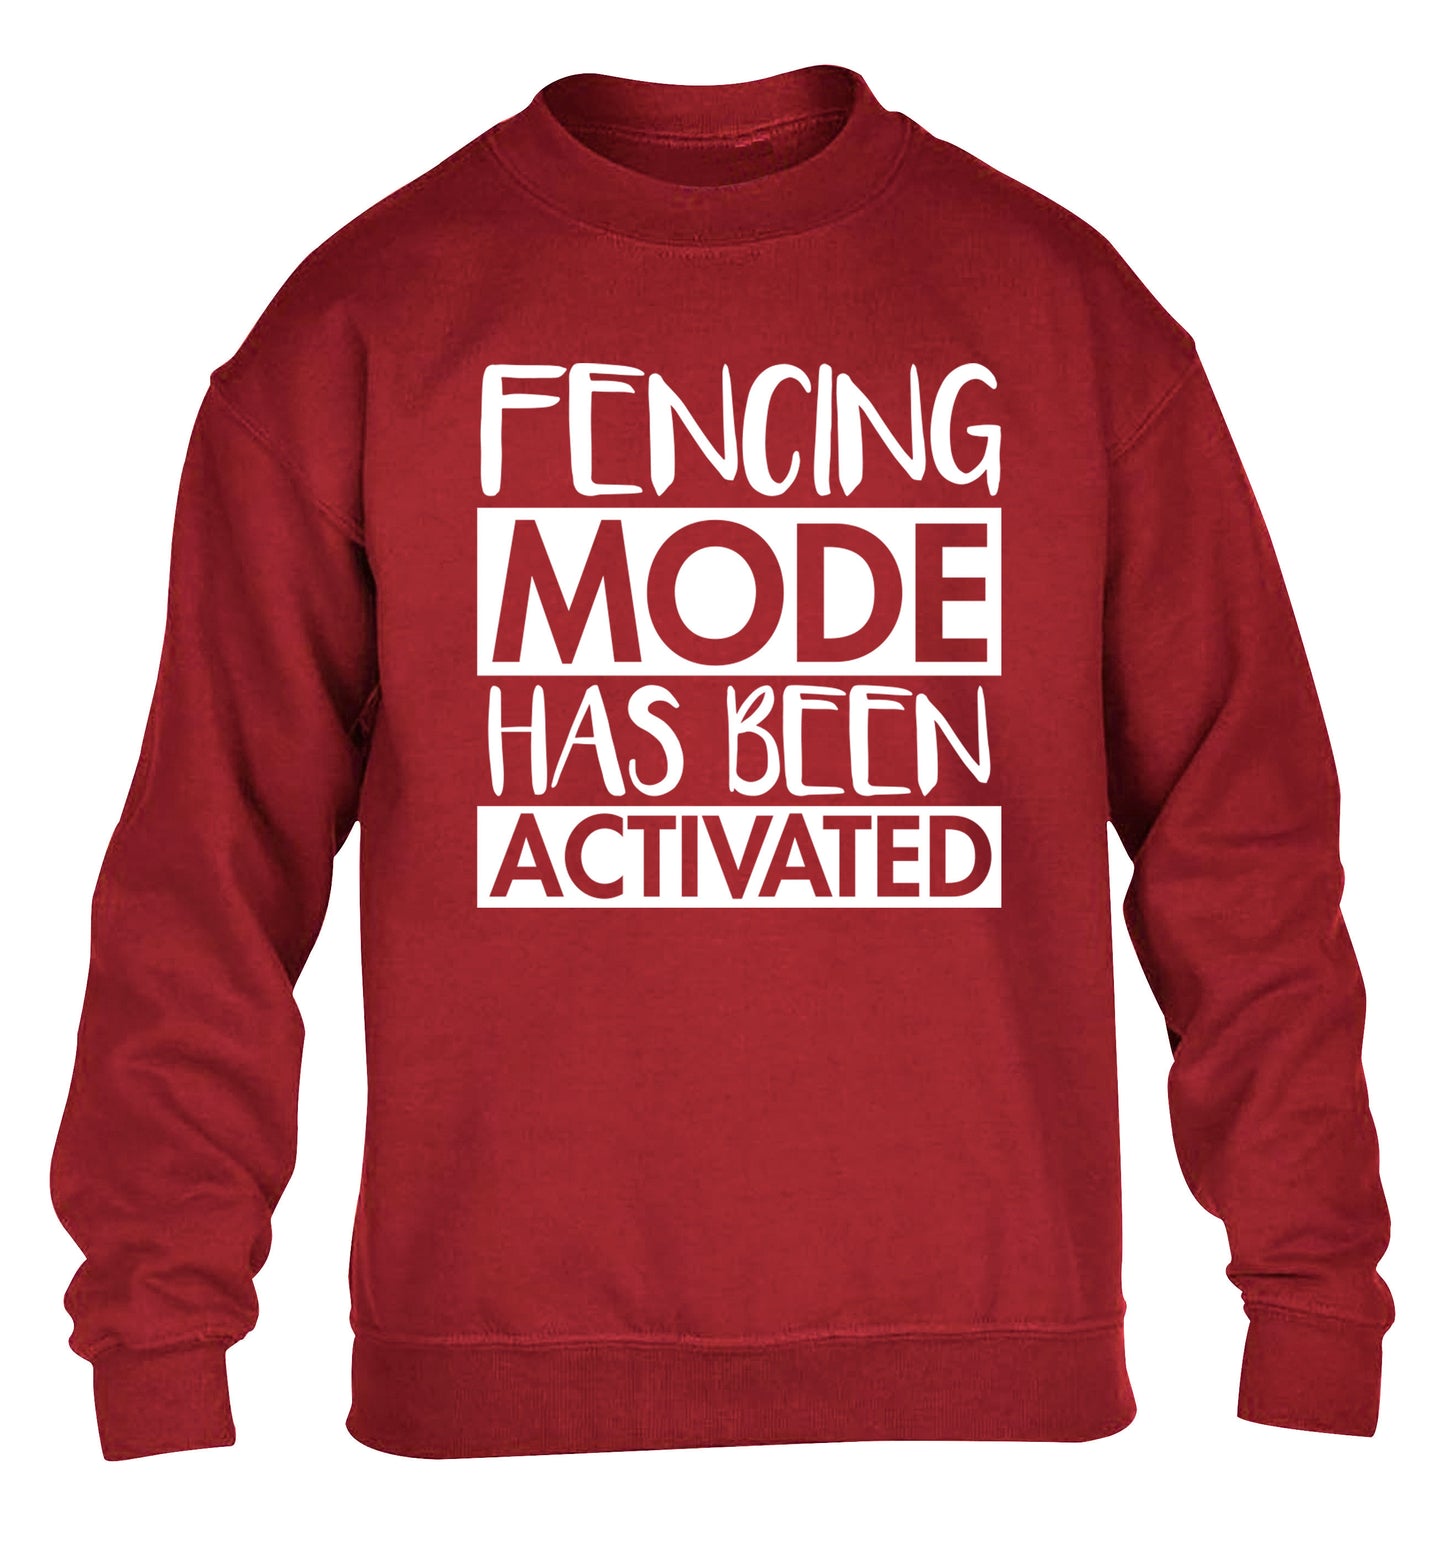 Fencing mode activated children's grey sweater 12-14 Years